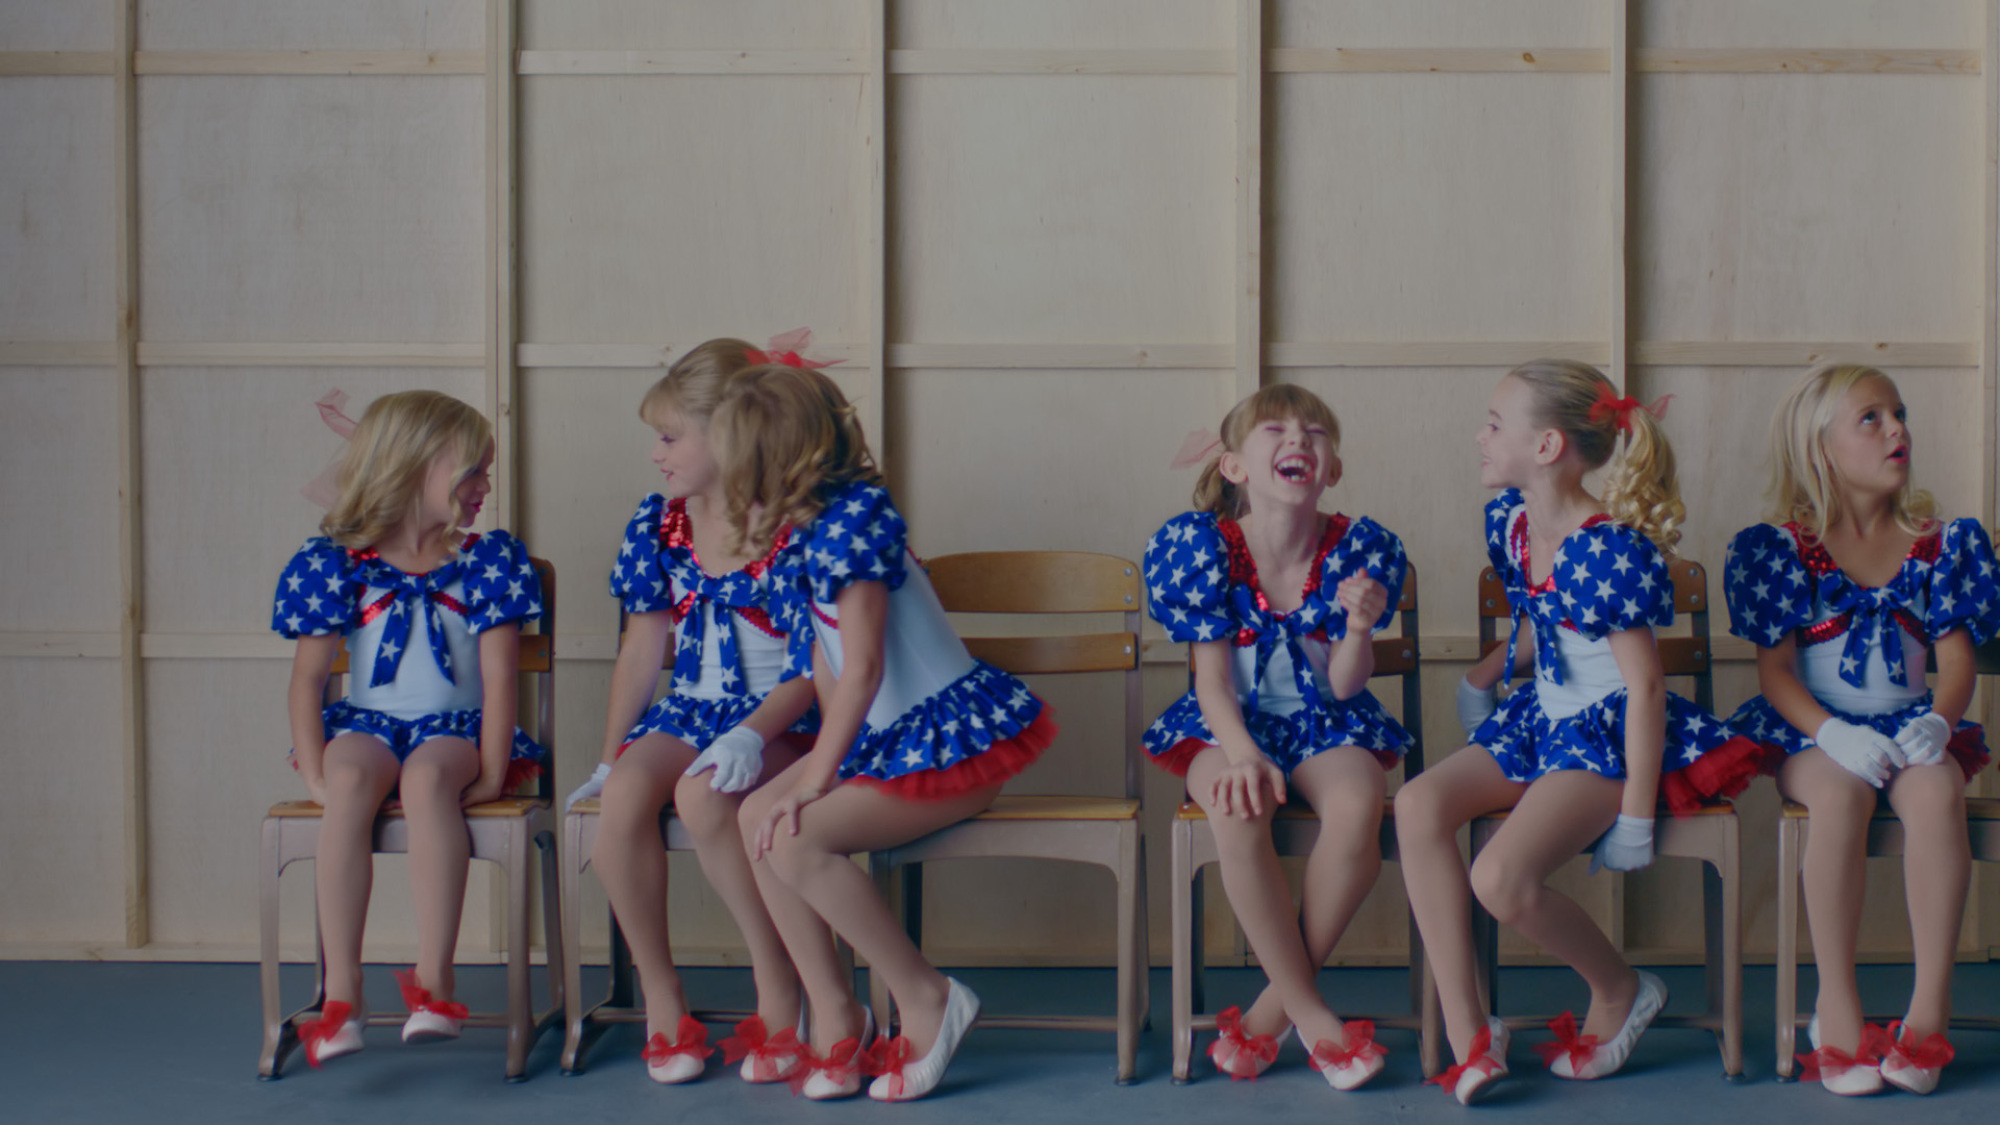 A group of girls all dressed as JonBenet Ramsay.